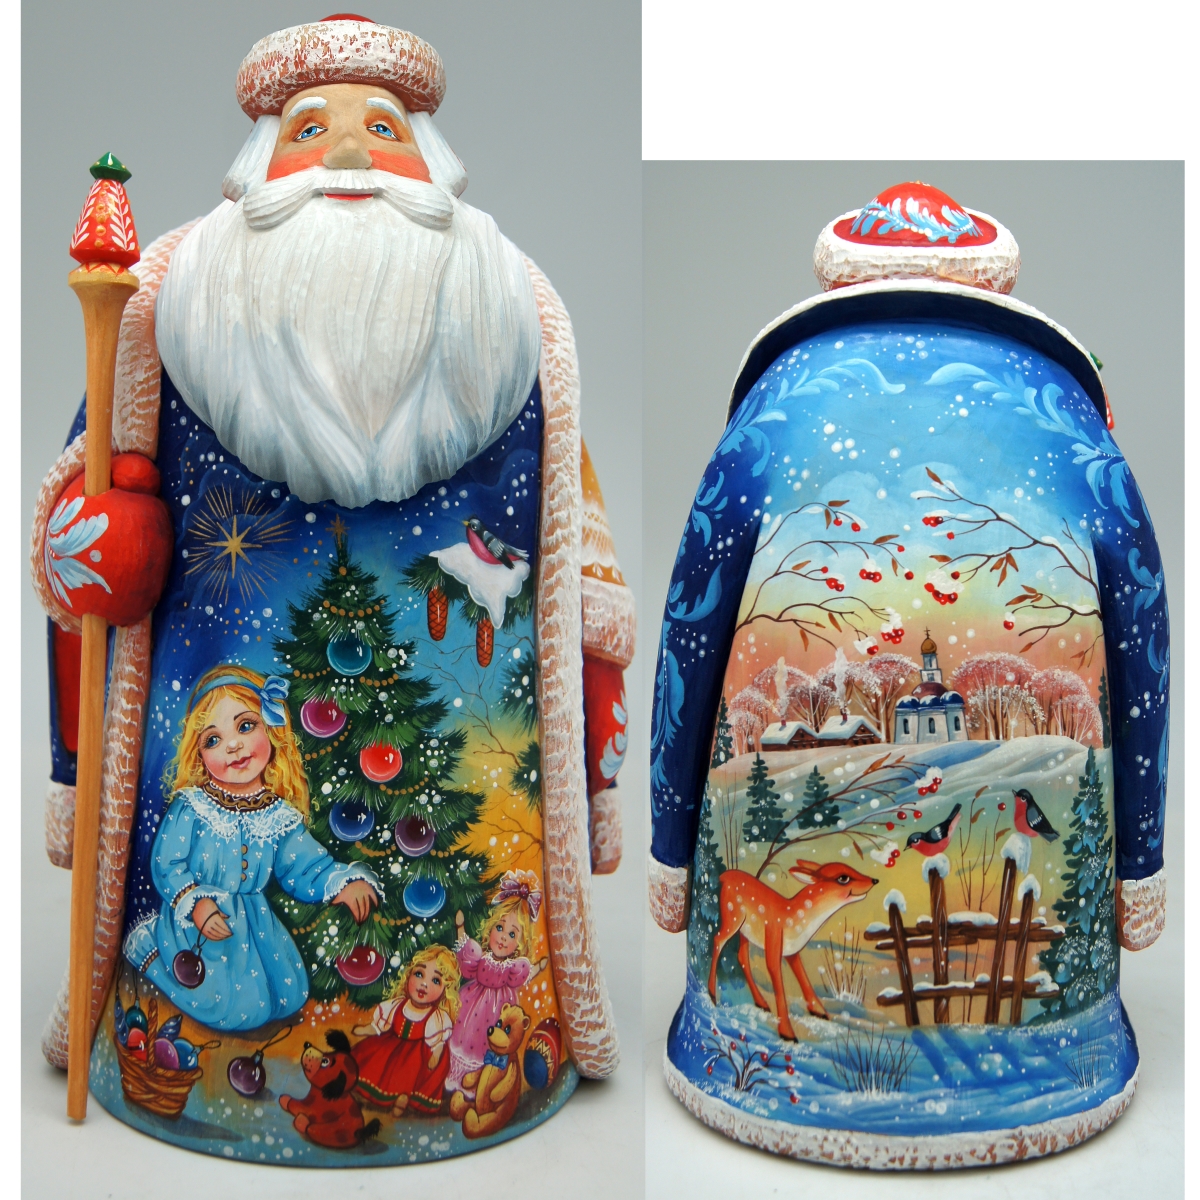 Picture of G.DeBrekht 215644 Angelic Christmas Tree Wood Carved Hand Painted Santa Clause Figurine